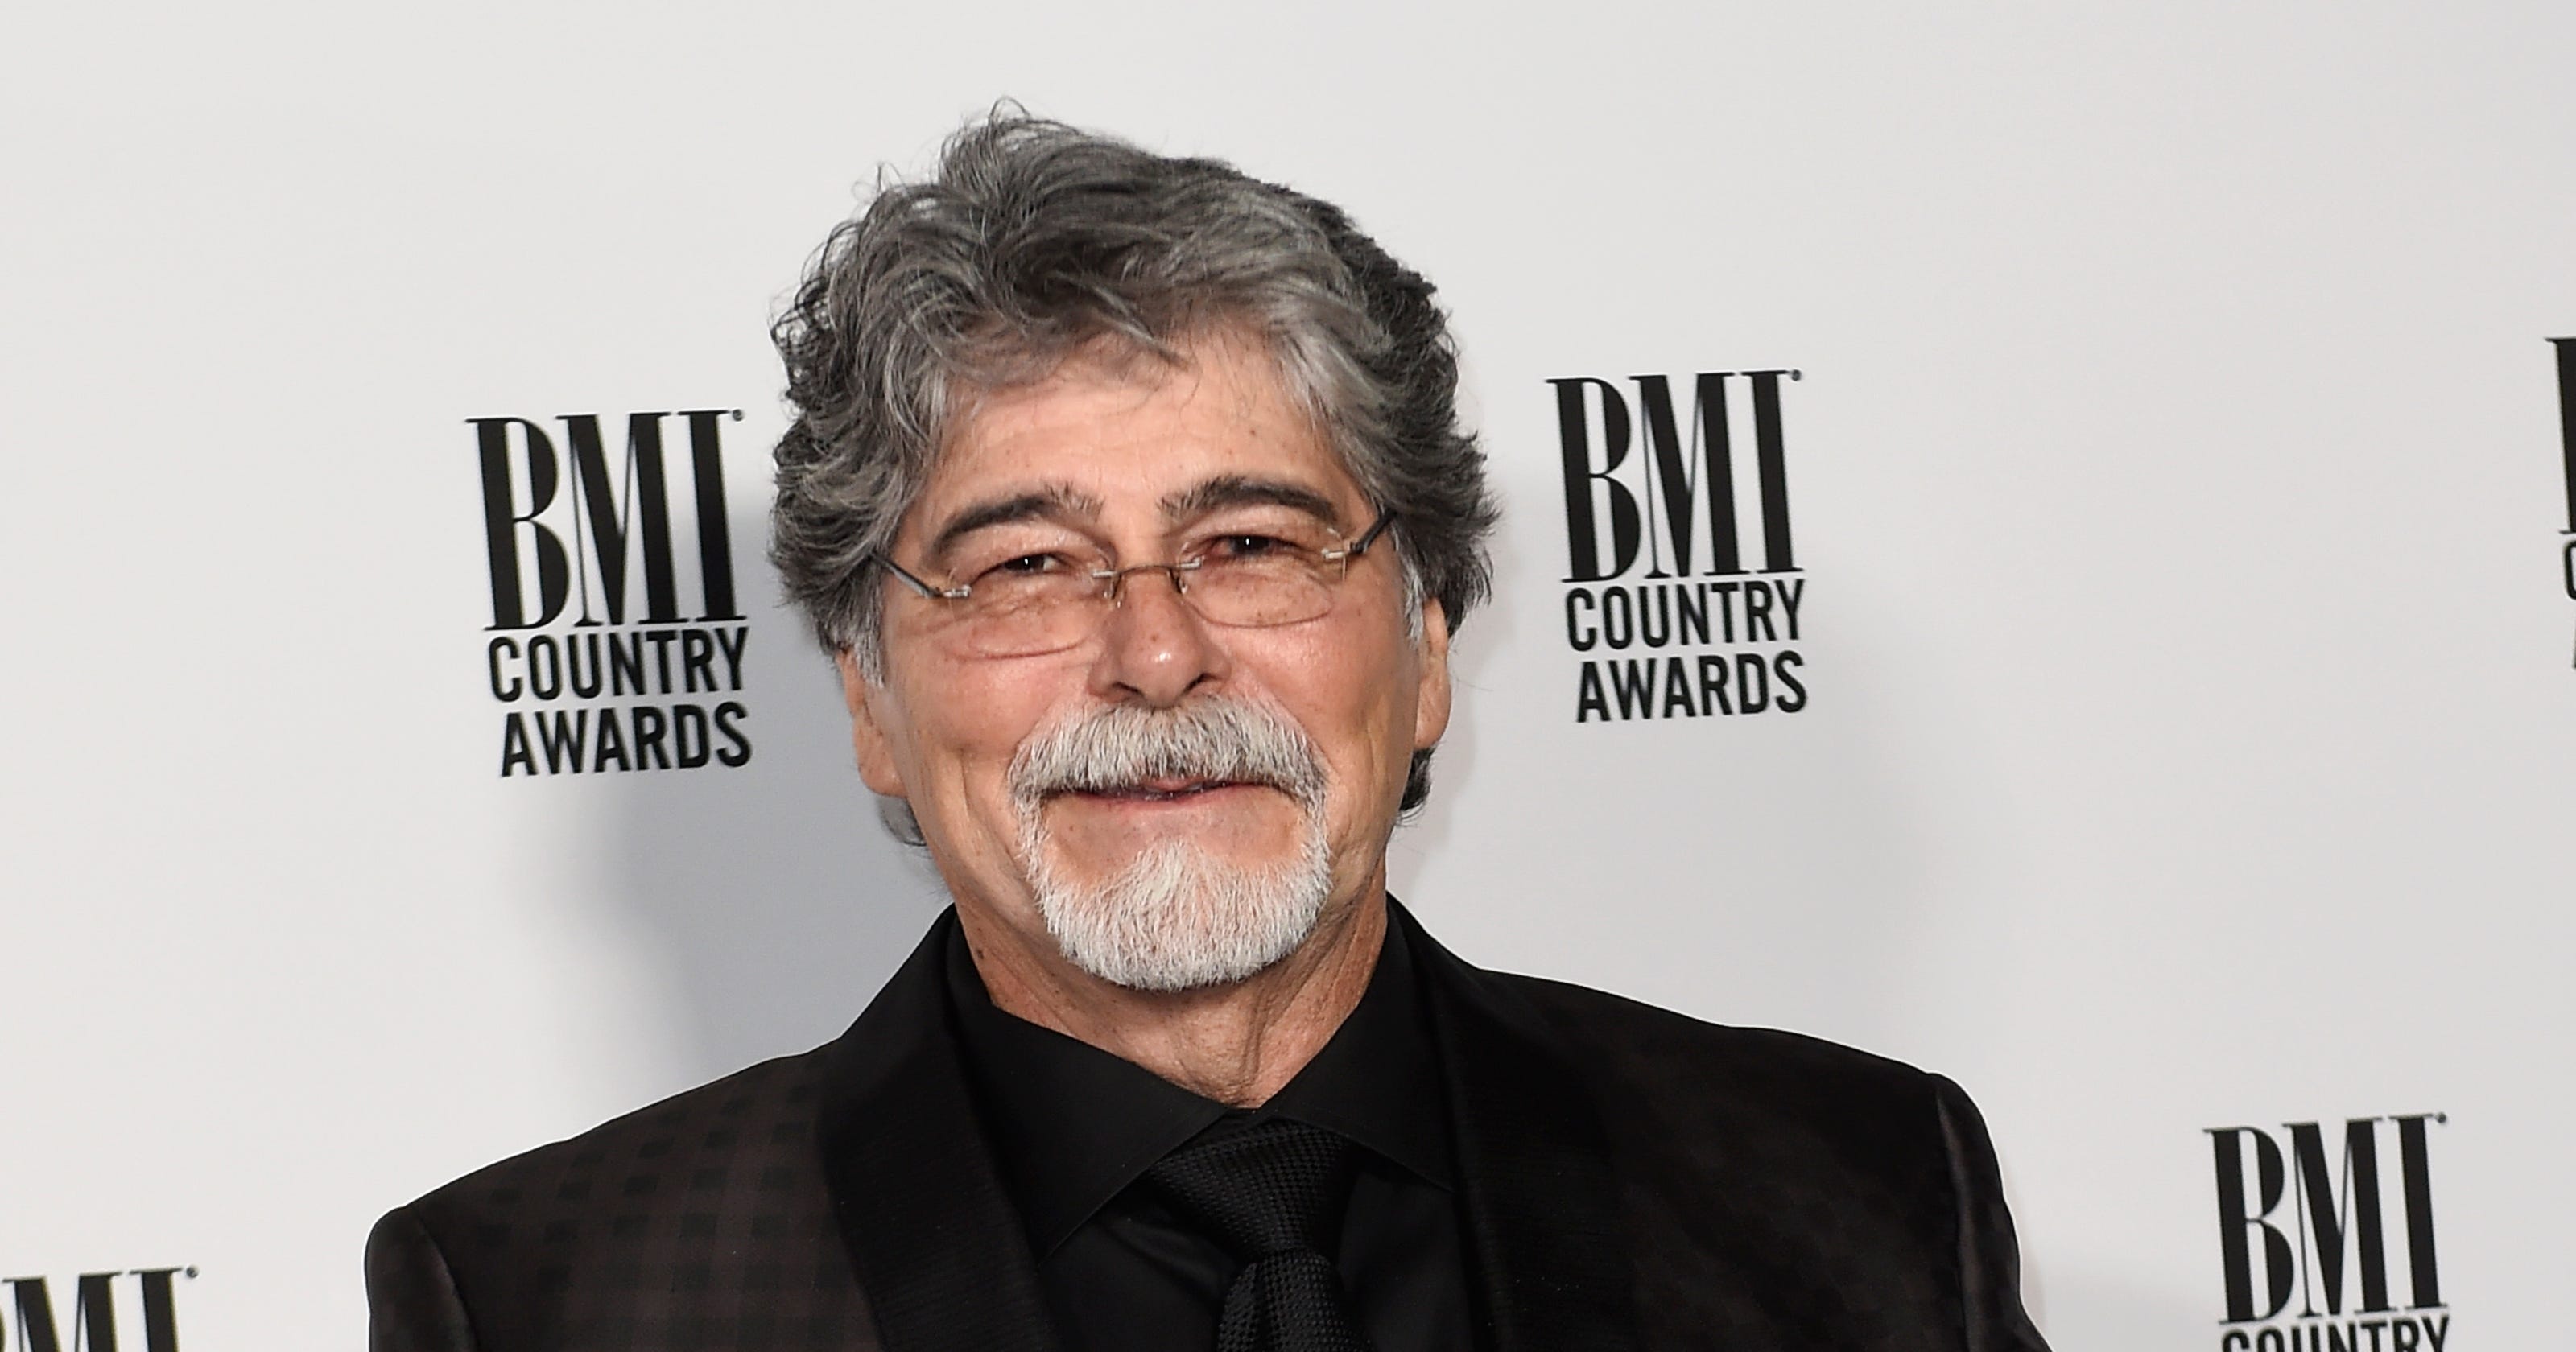 Alabama singer Randy Owen recognized by Boy Scouts for humanitarian work